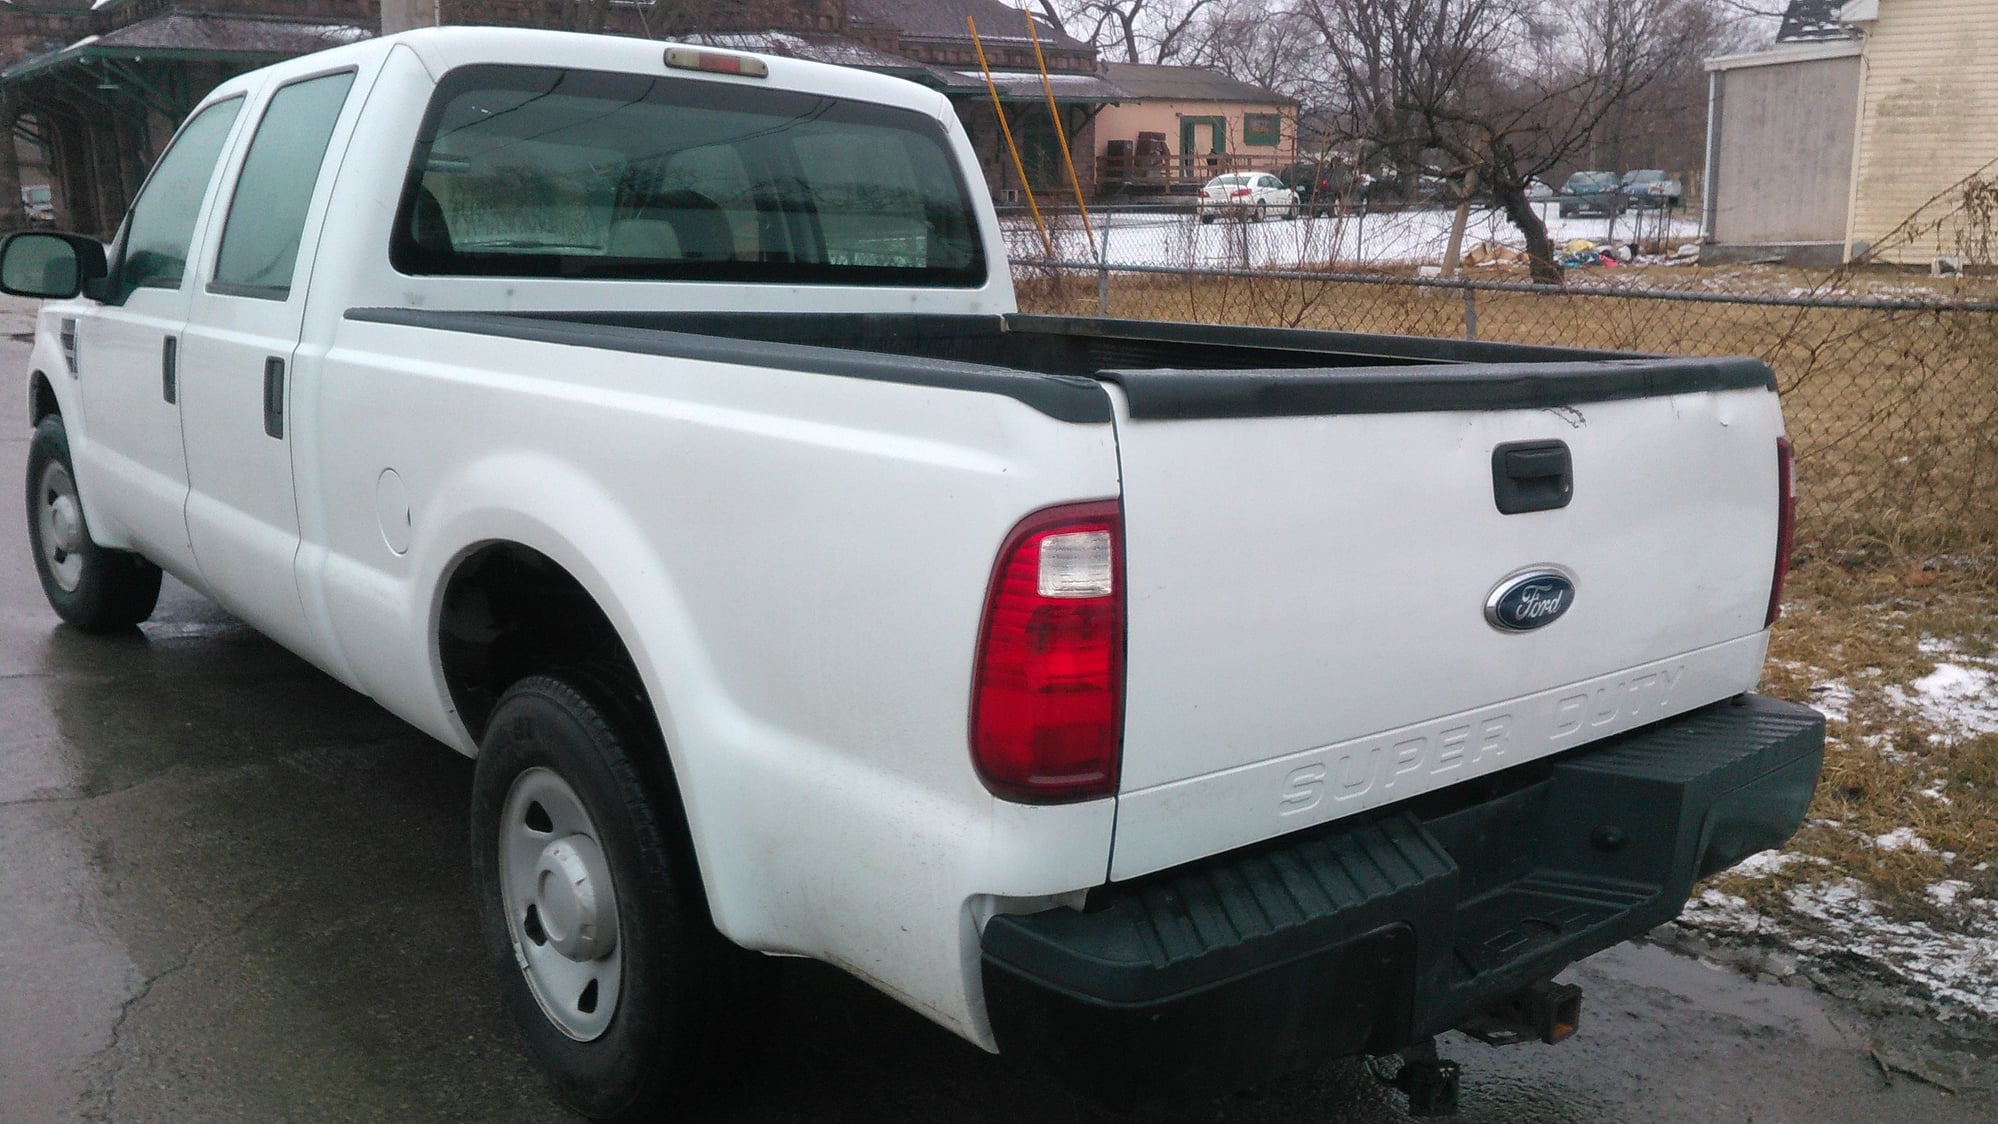 2014 Ford F-250 Super Duty - Parting a 2008 F250 Superduty 2 wheel drive shortbed truck. - Leavenworth, KS 66048, United States